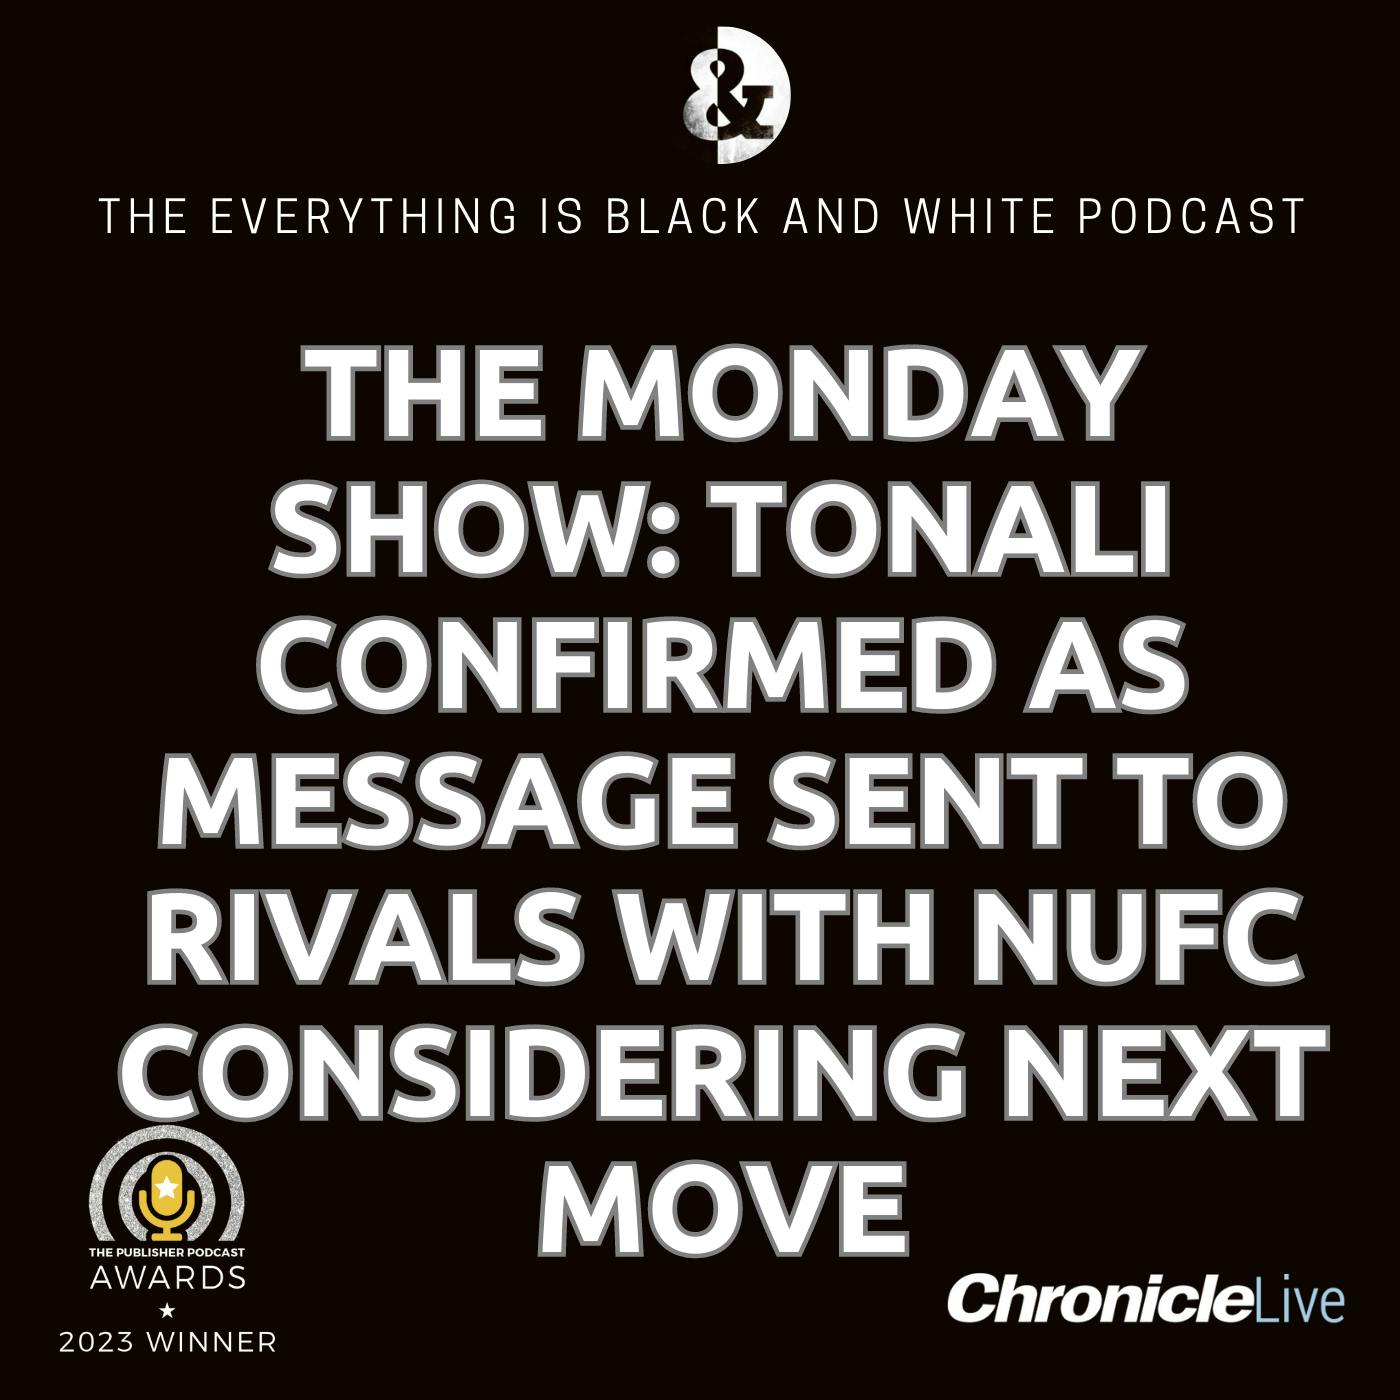 THE MONDAY SHOW: TONALI CONFIRMED | MESSAGE SENT TO RIVALS | PHILLIPS AND GALLAGHER NEXT | KLOPP'S MYSTERIOUS DISAPPEARING CEILING